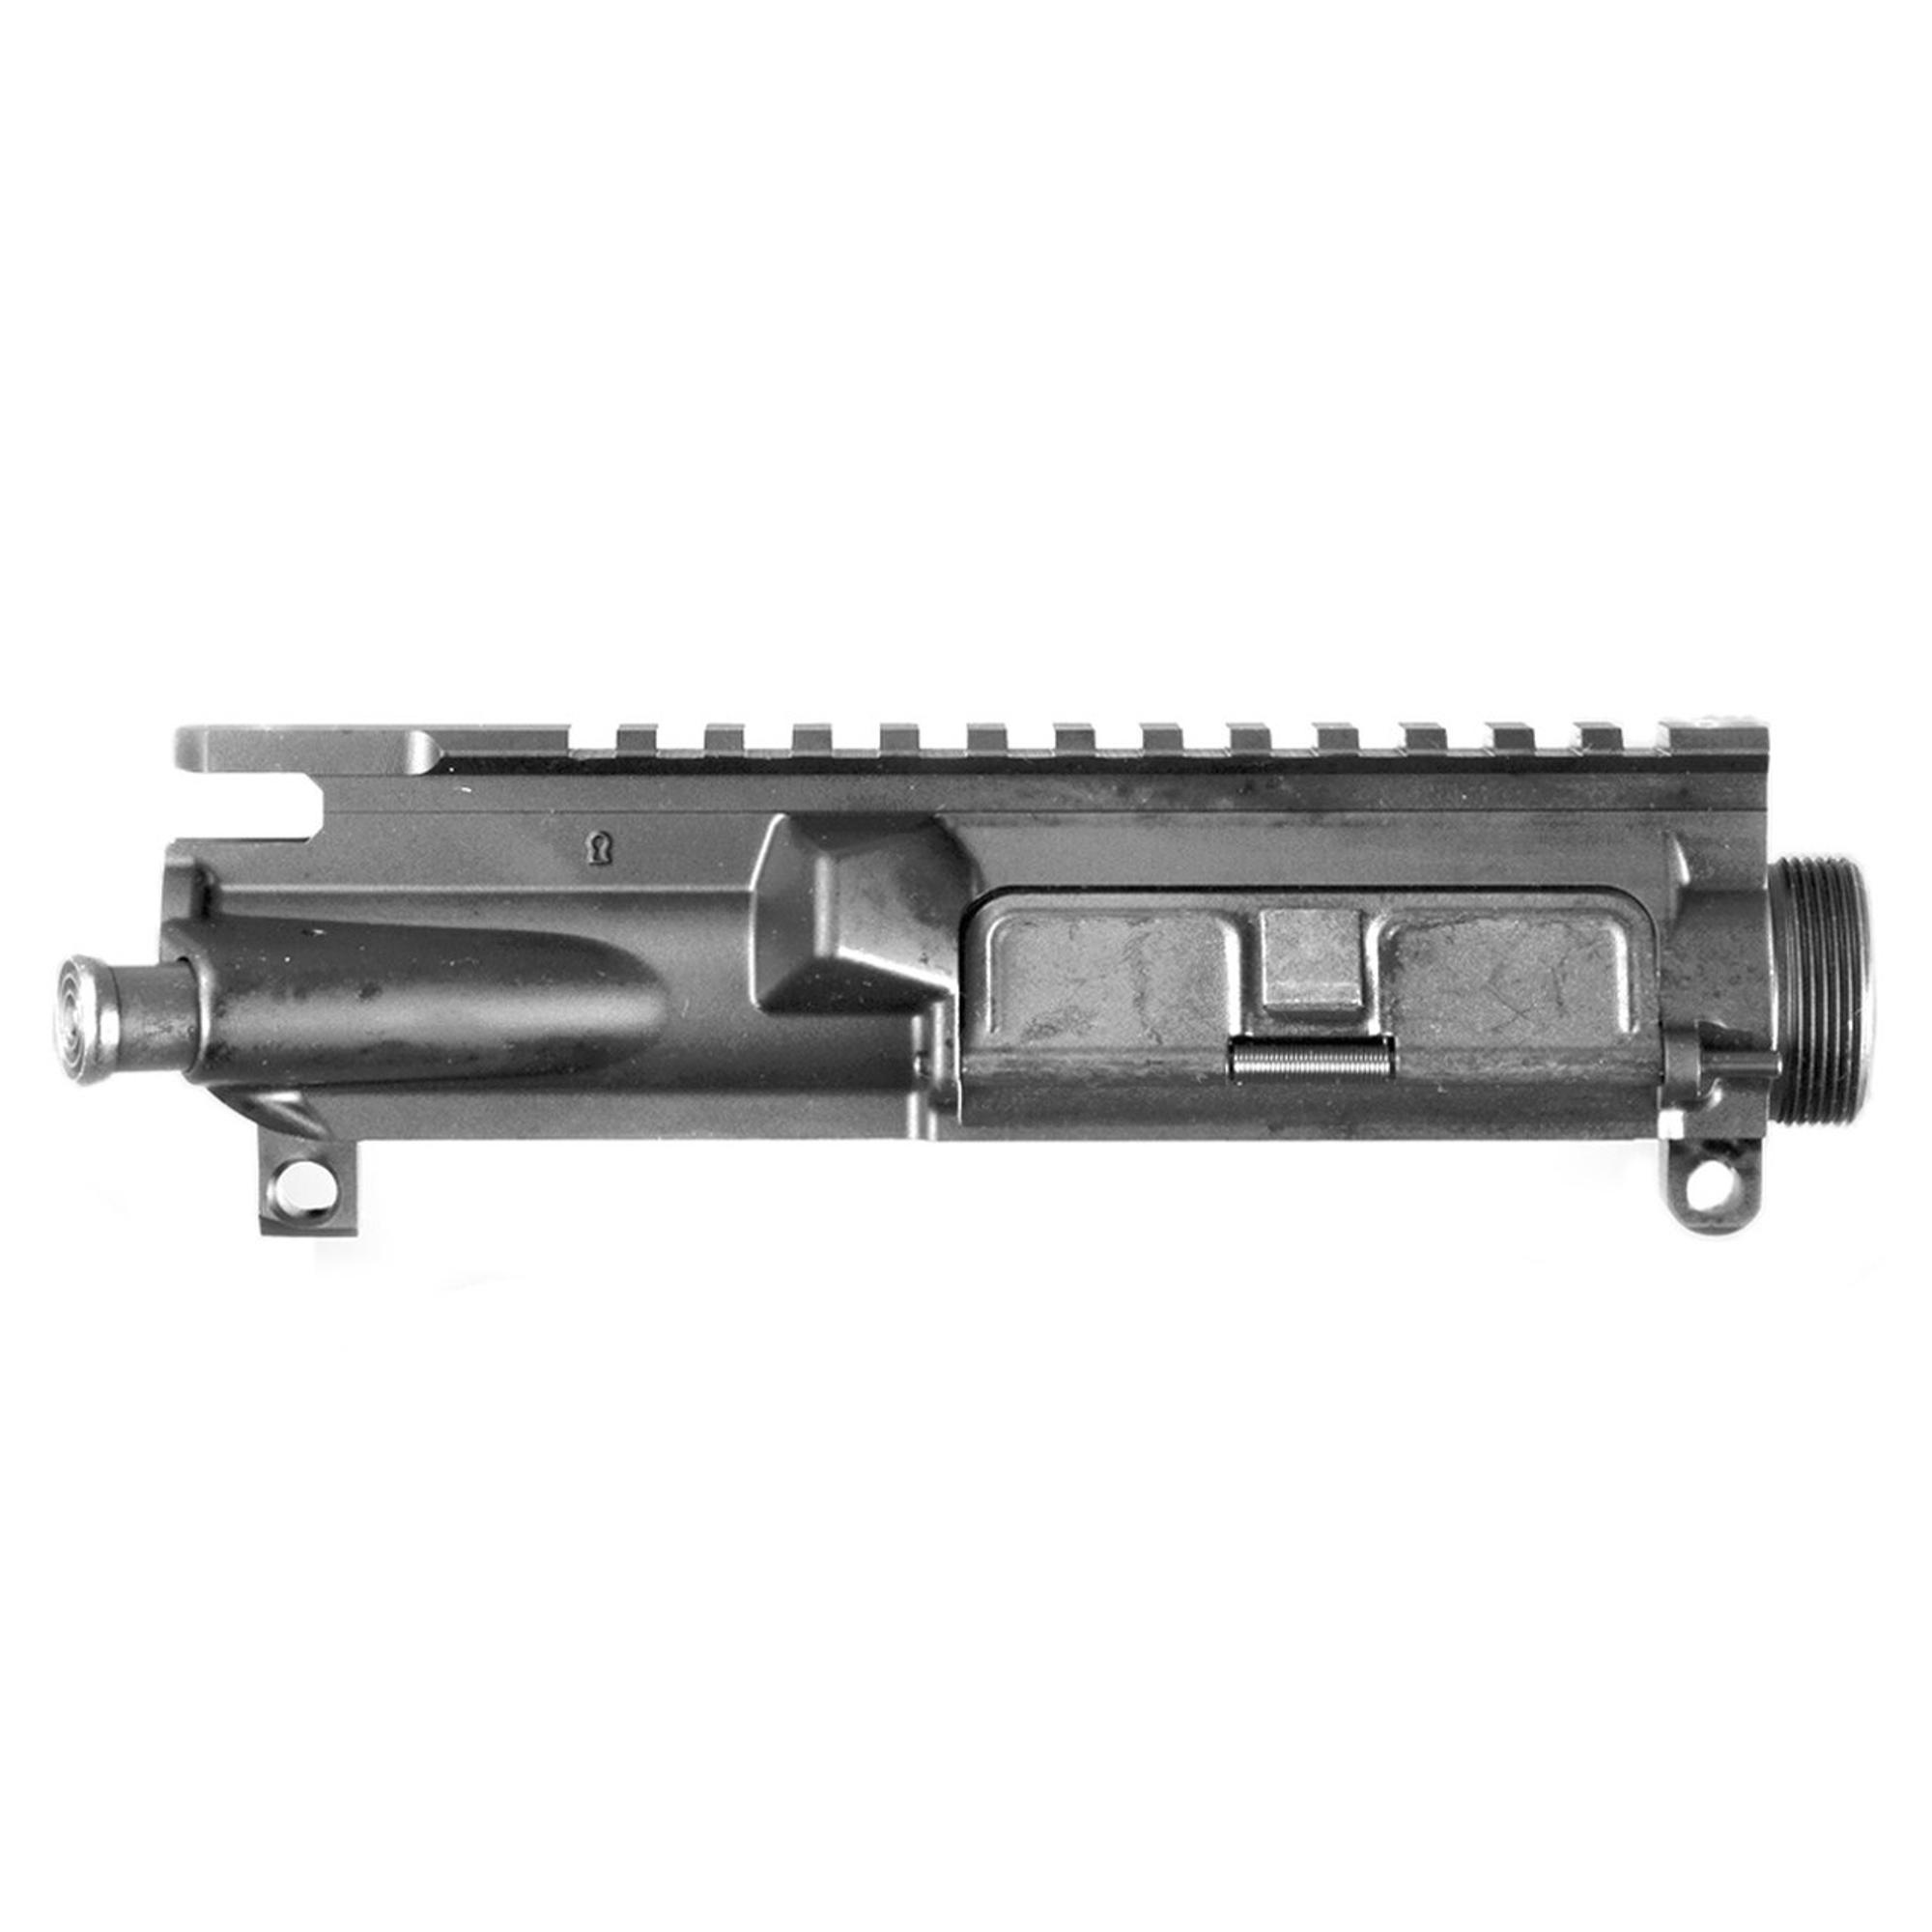 Anderson Assembled Upper